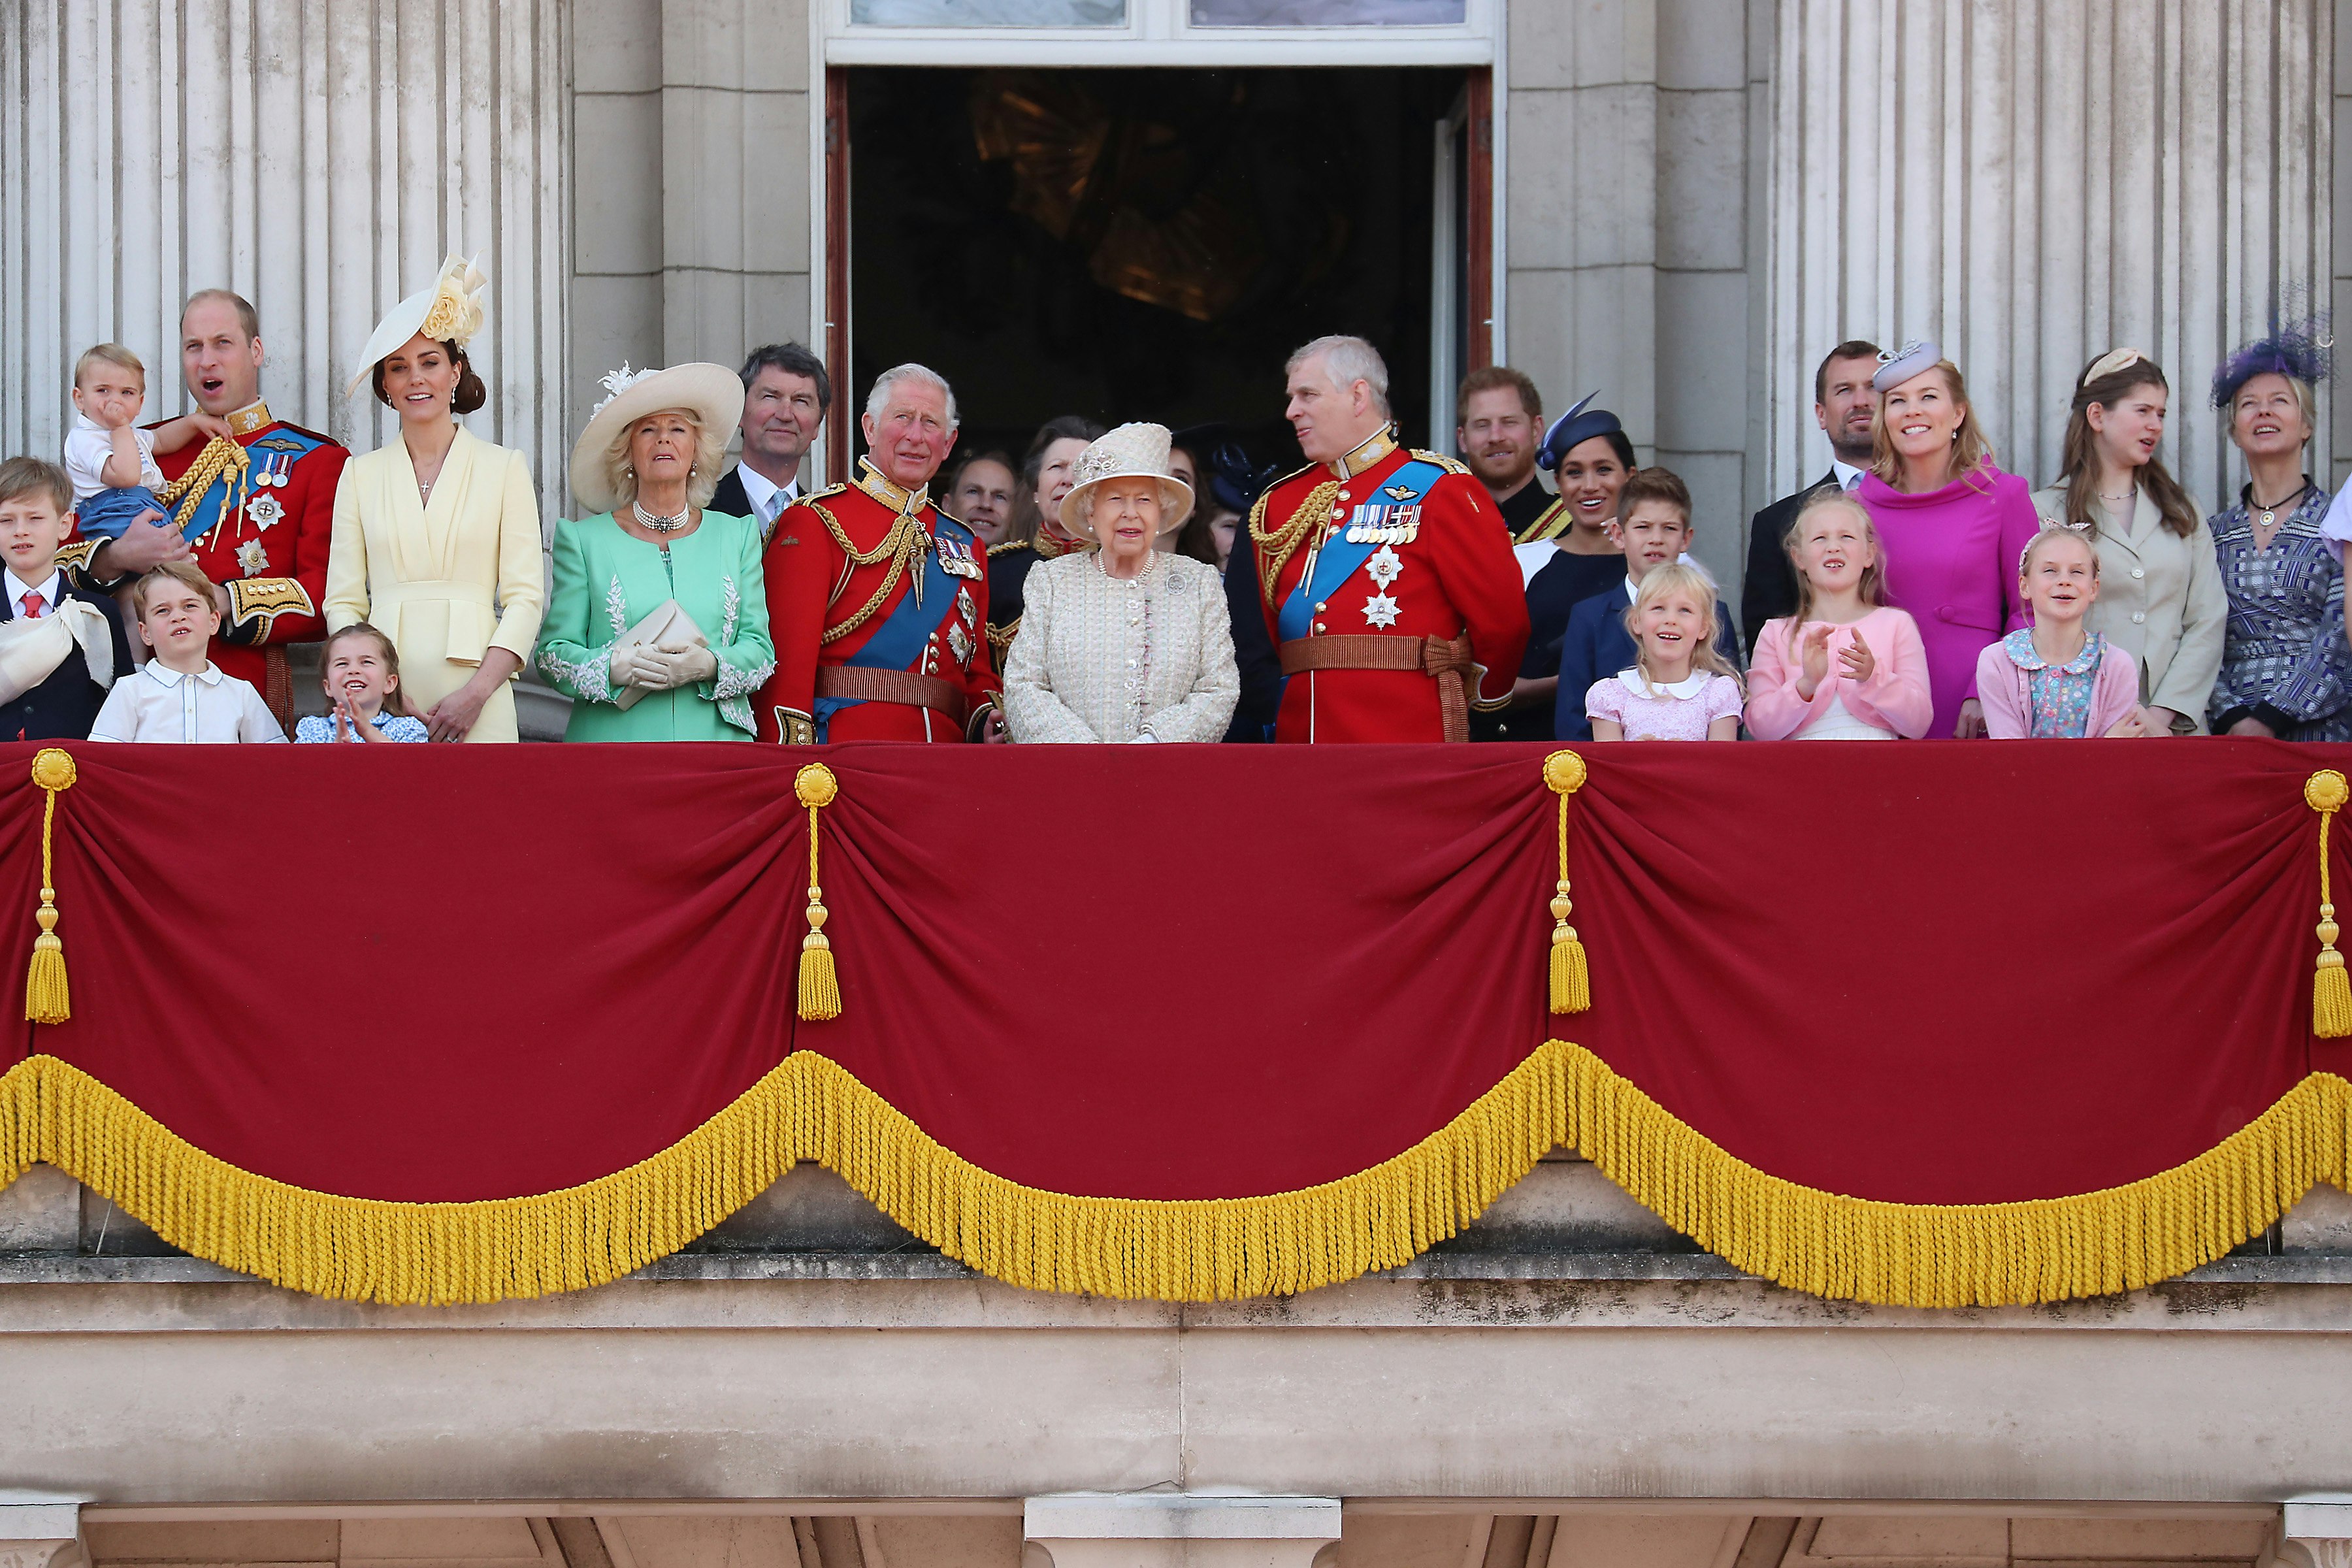 A picture of the Royal Family at the ceremony of Trooping the Colour in 2019